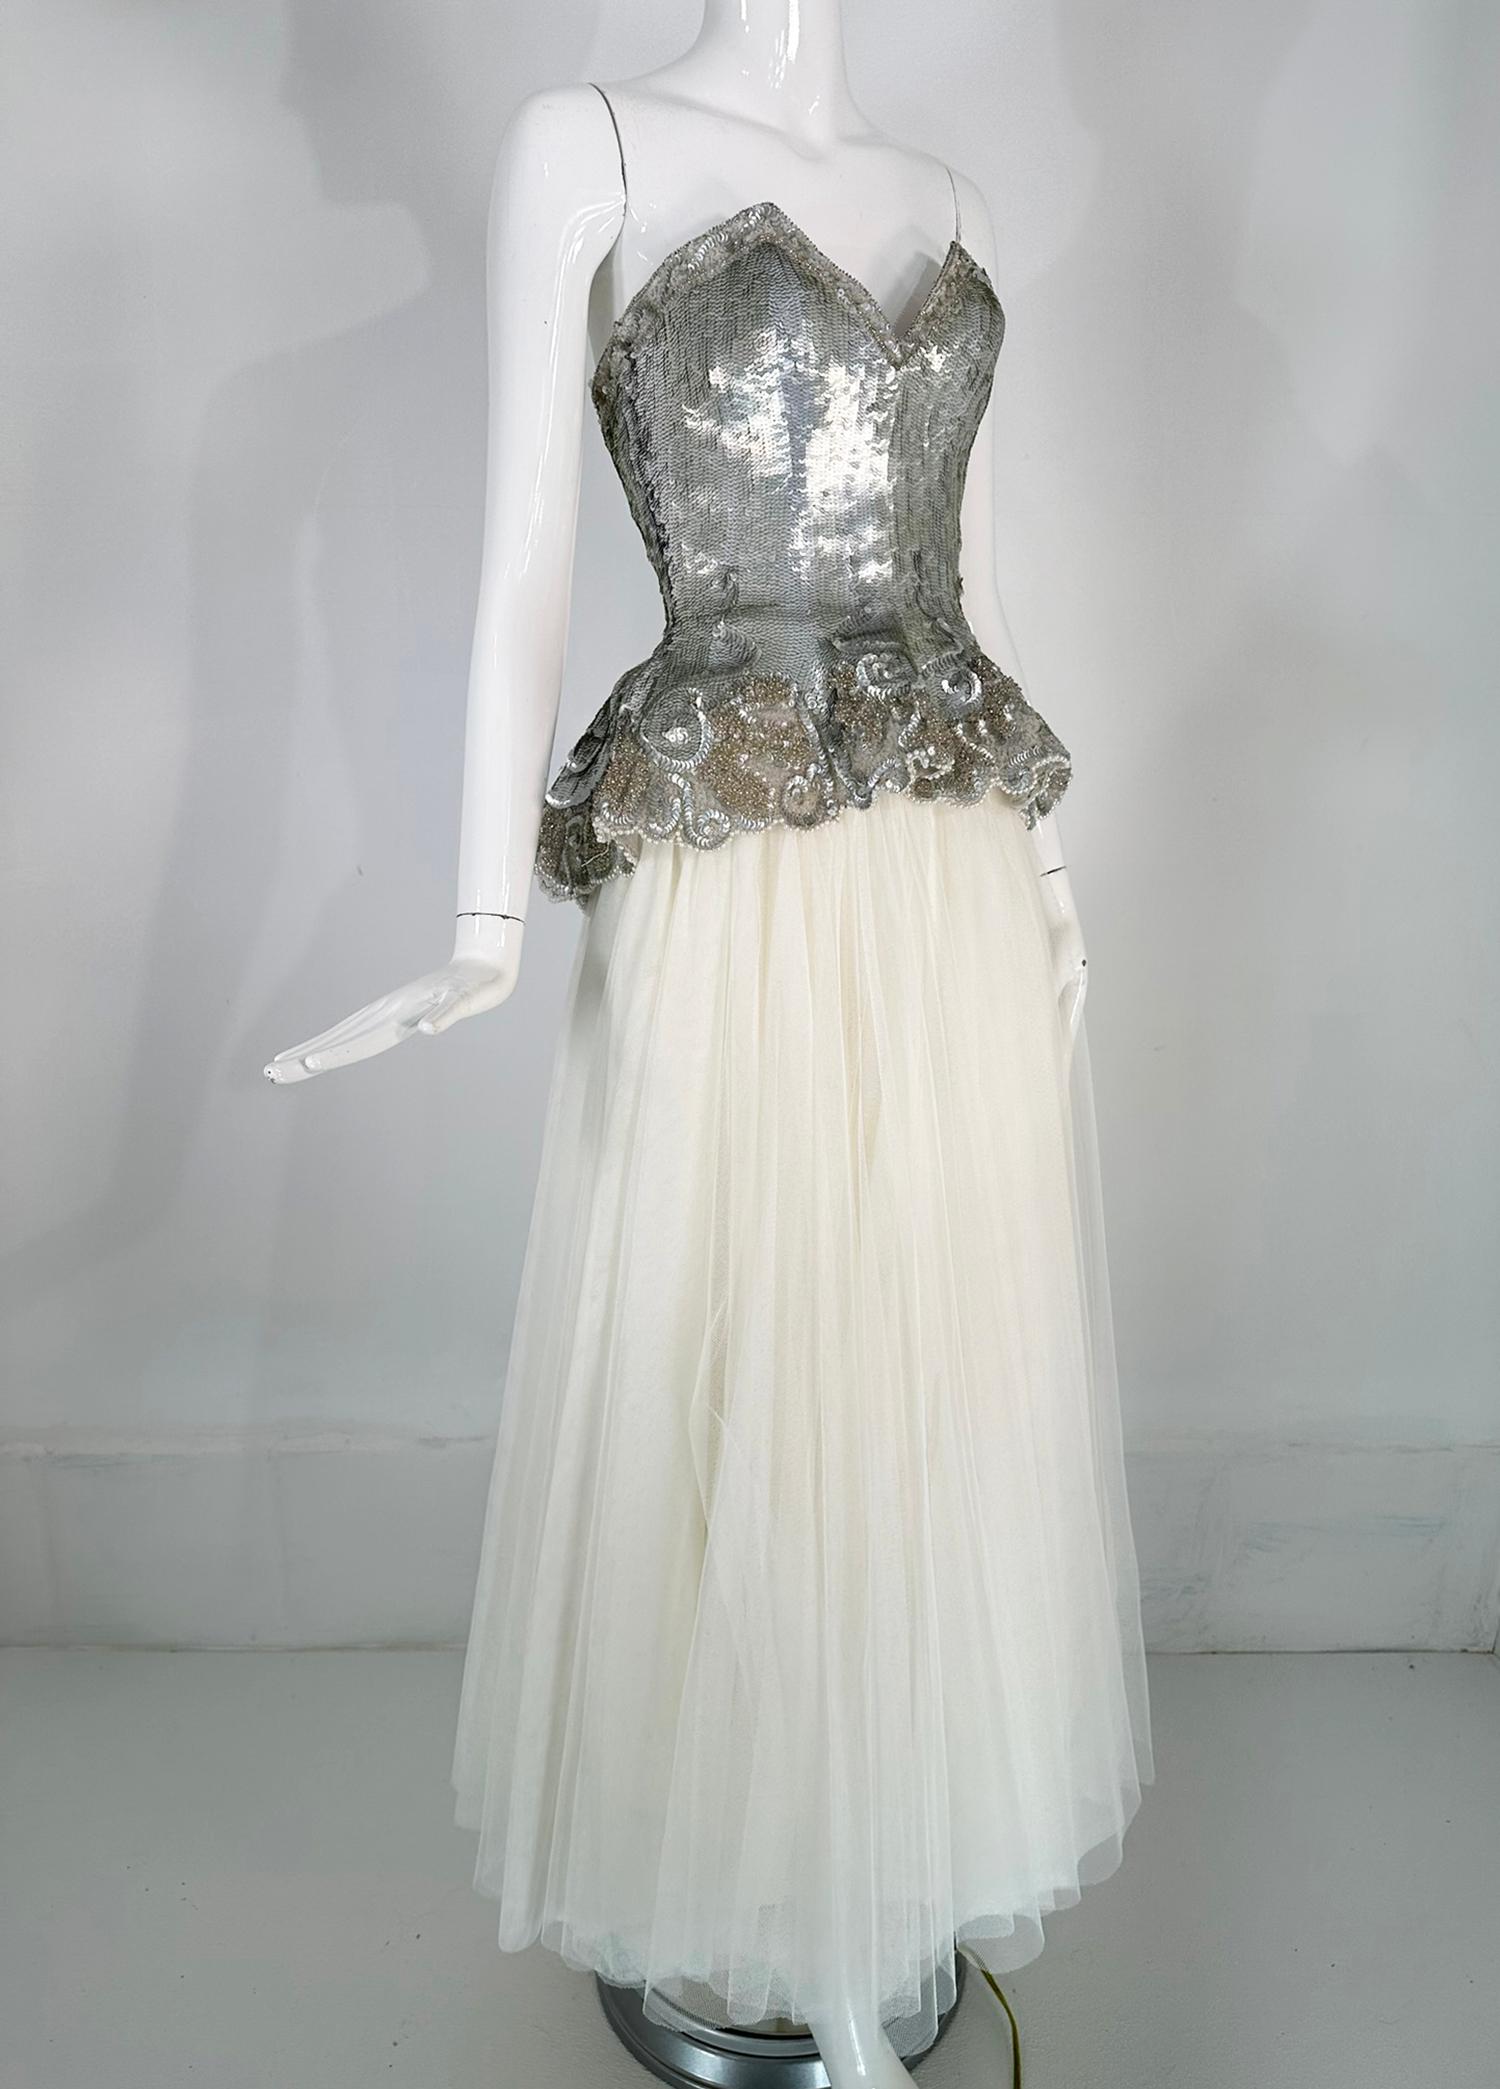 Fabrice Couture gold & silver sequin peplum hem bustier with white layered tulle skirt from the 1980s. The bustier is completely covered in silver & gold sequins and glass beads, it glitters & glows under the lights & is perfect paired with the